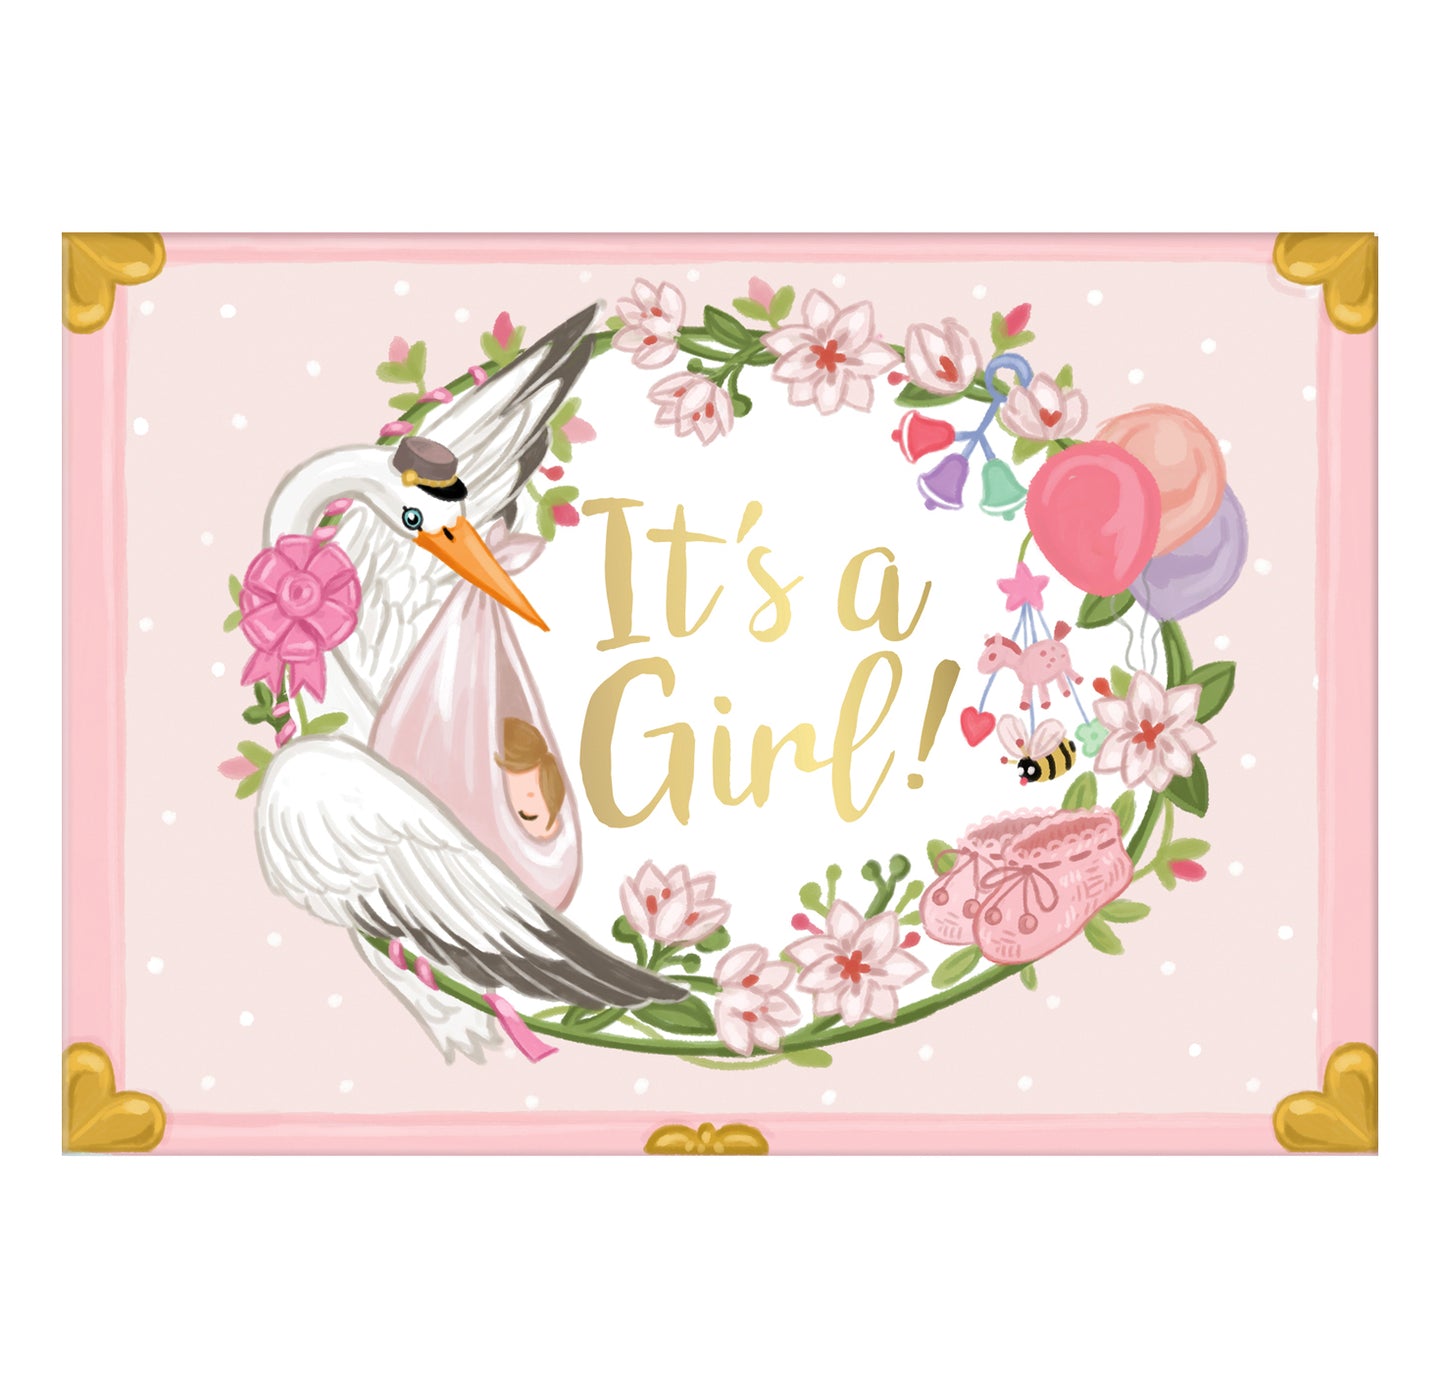 It's A Girl Music Box Card Novelty Dancing Musical Greeting Card